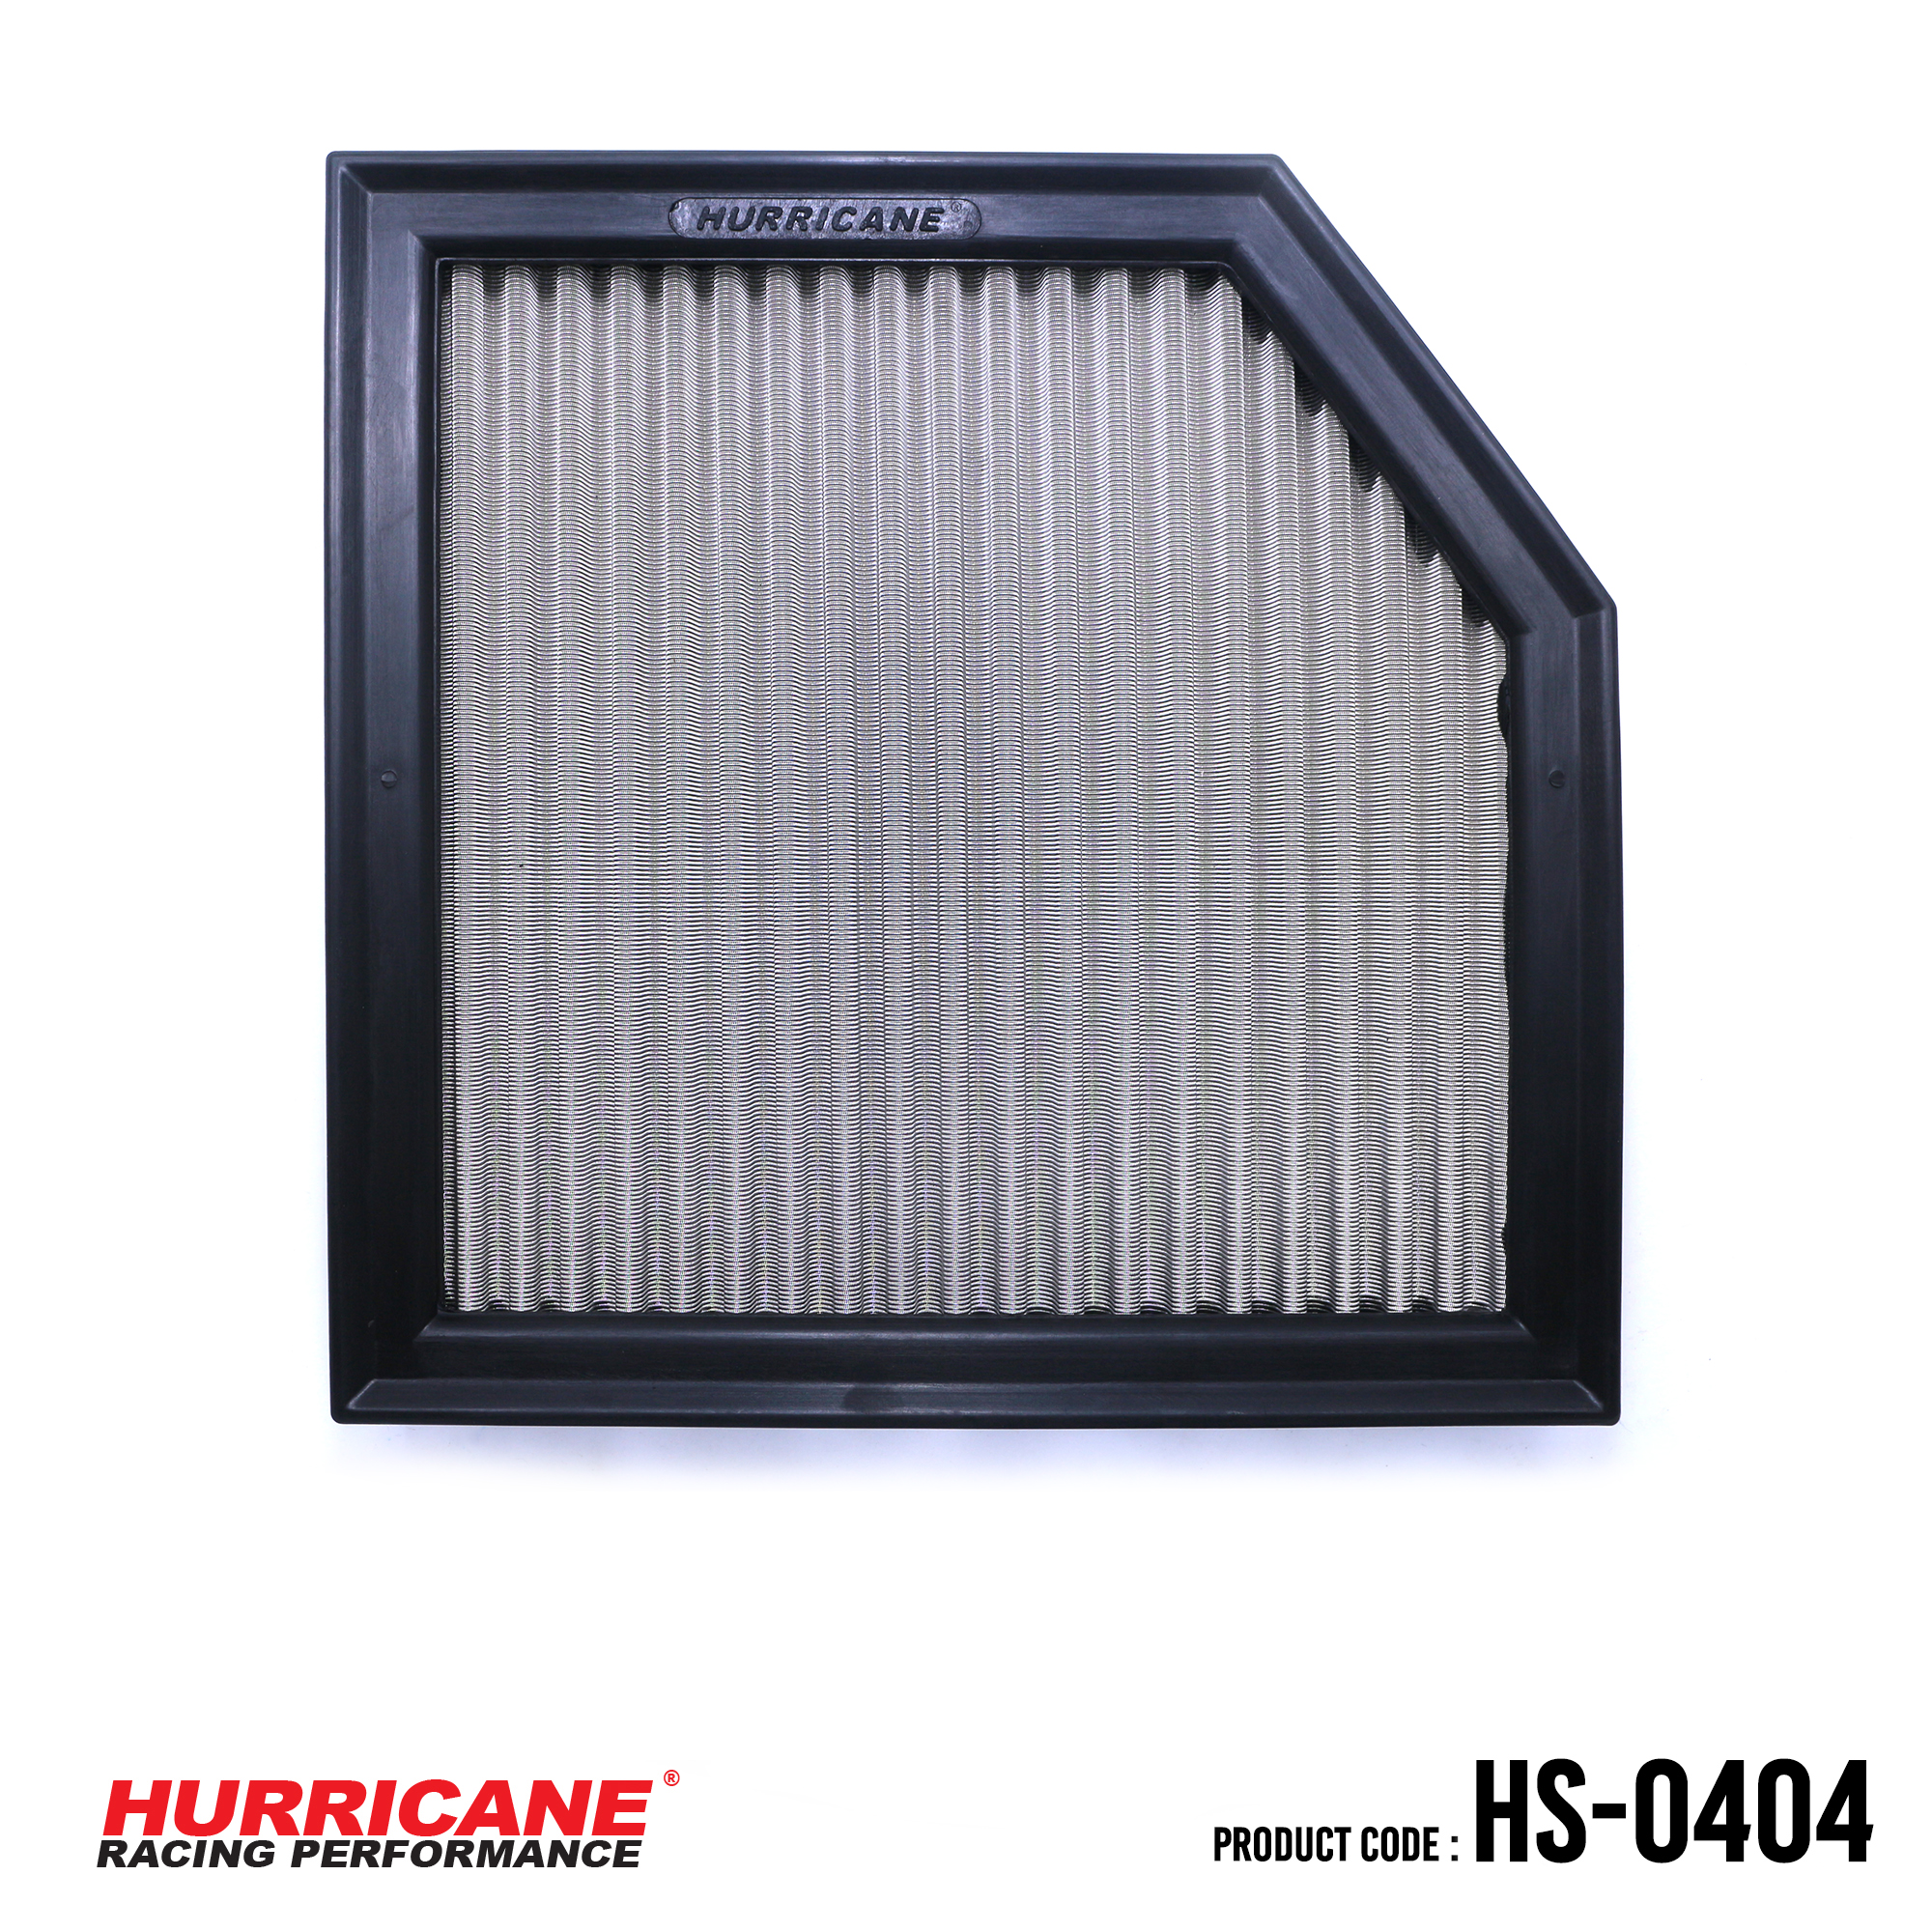 HURRICANE STAINLESS STEEL AIR FILTER FOR HS-0404 ToyotaLexus